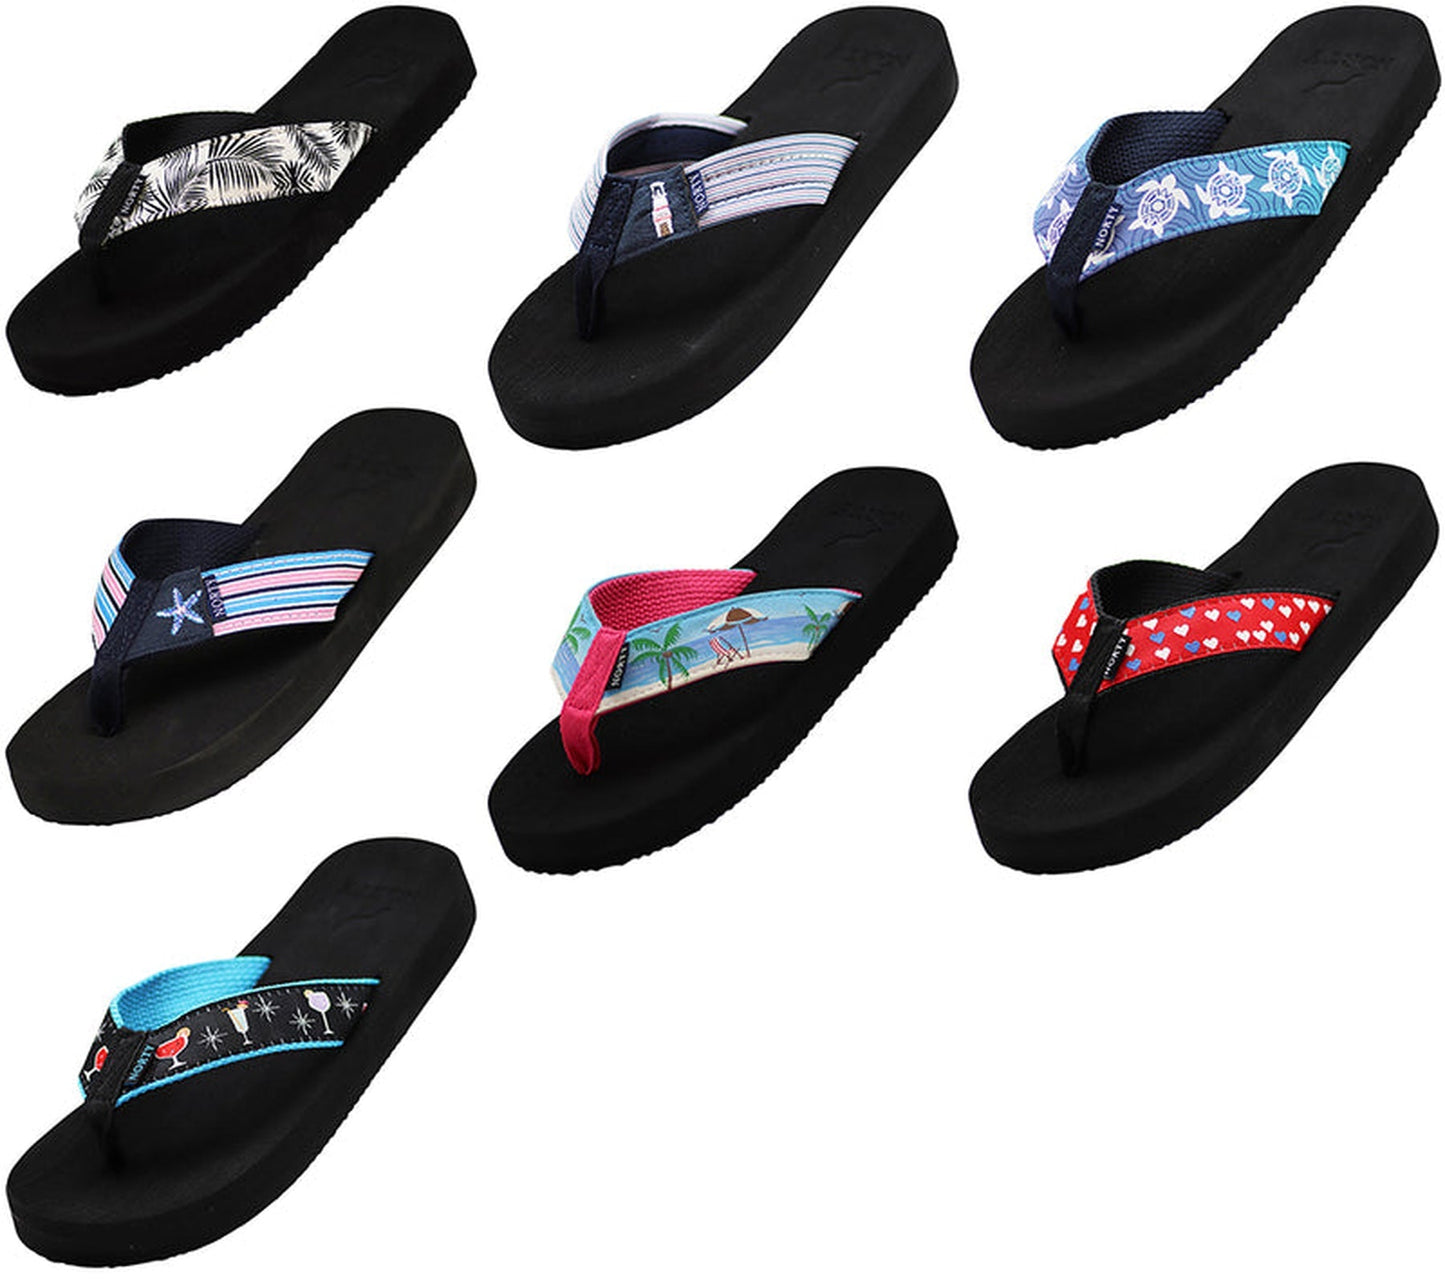 NORTY Womens Flip Flops Adult Female Thong Sandals, Indy Tie Dye